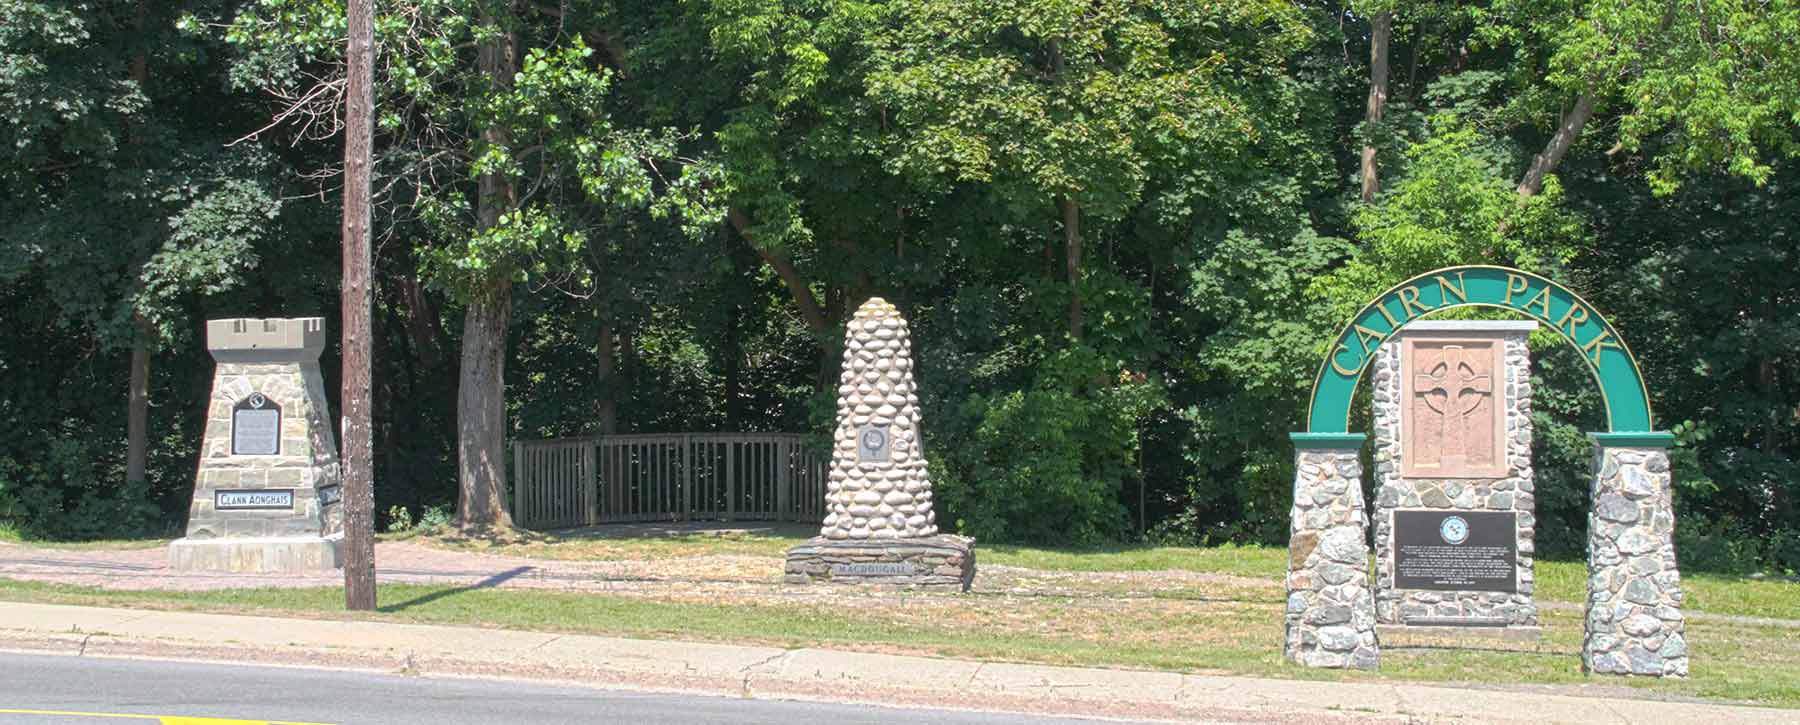 The Cairn Park entrance and Clan MacInness Cairn